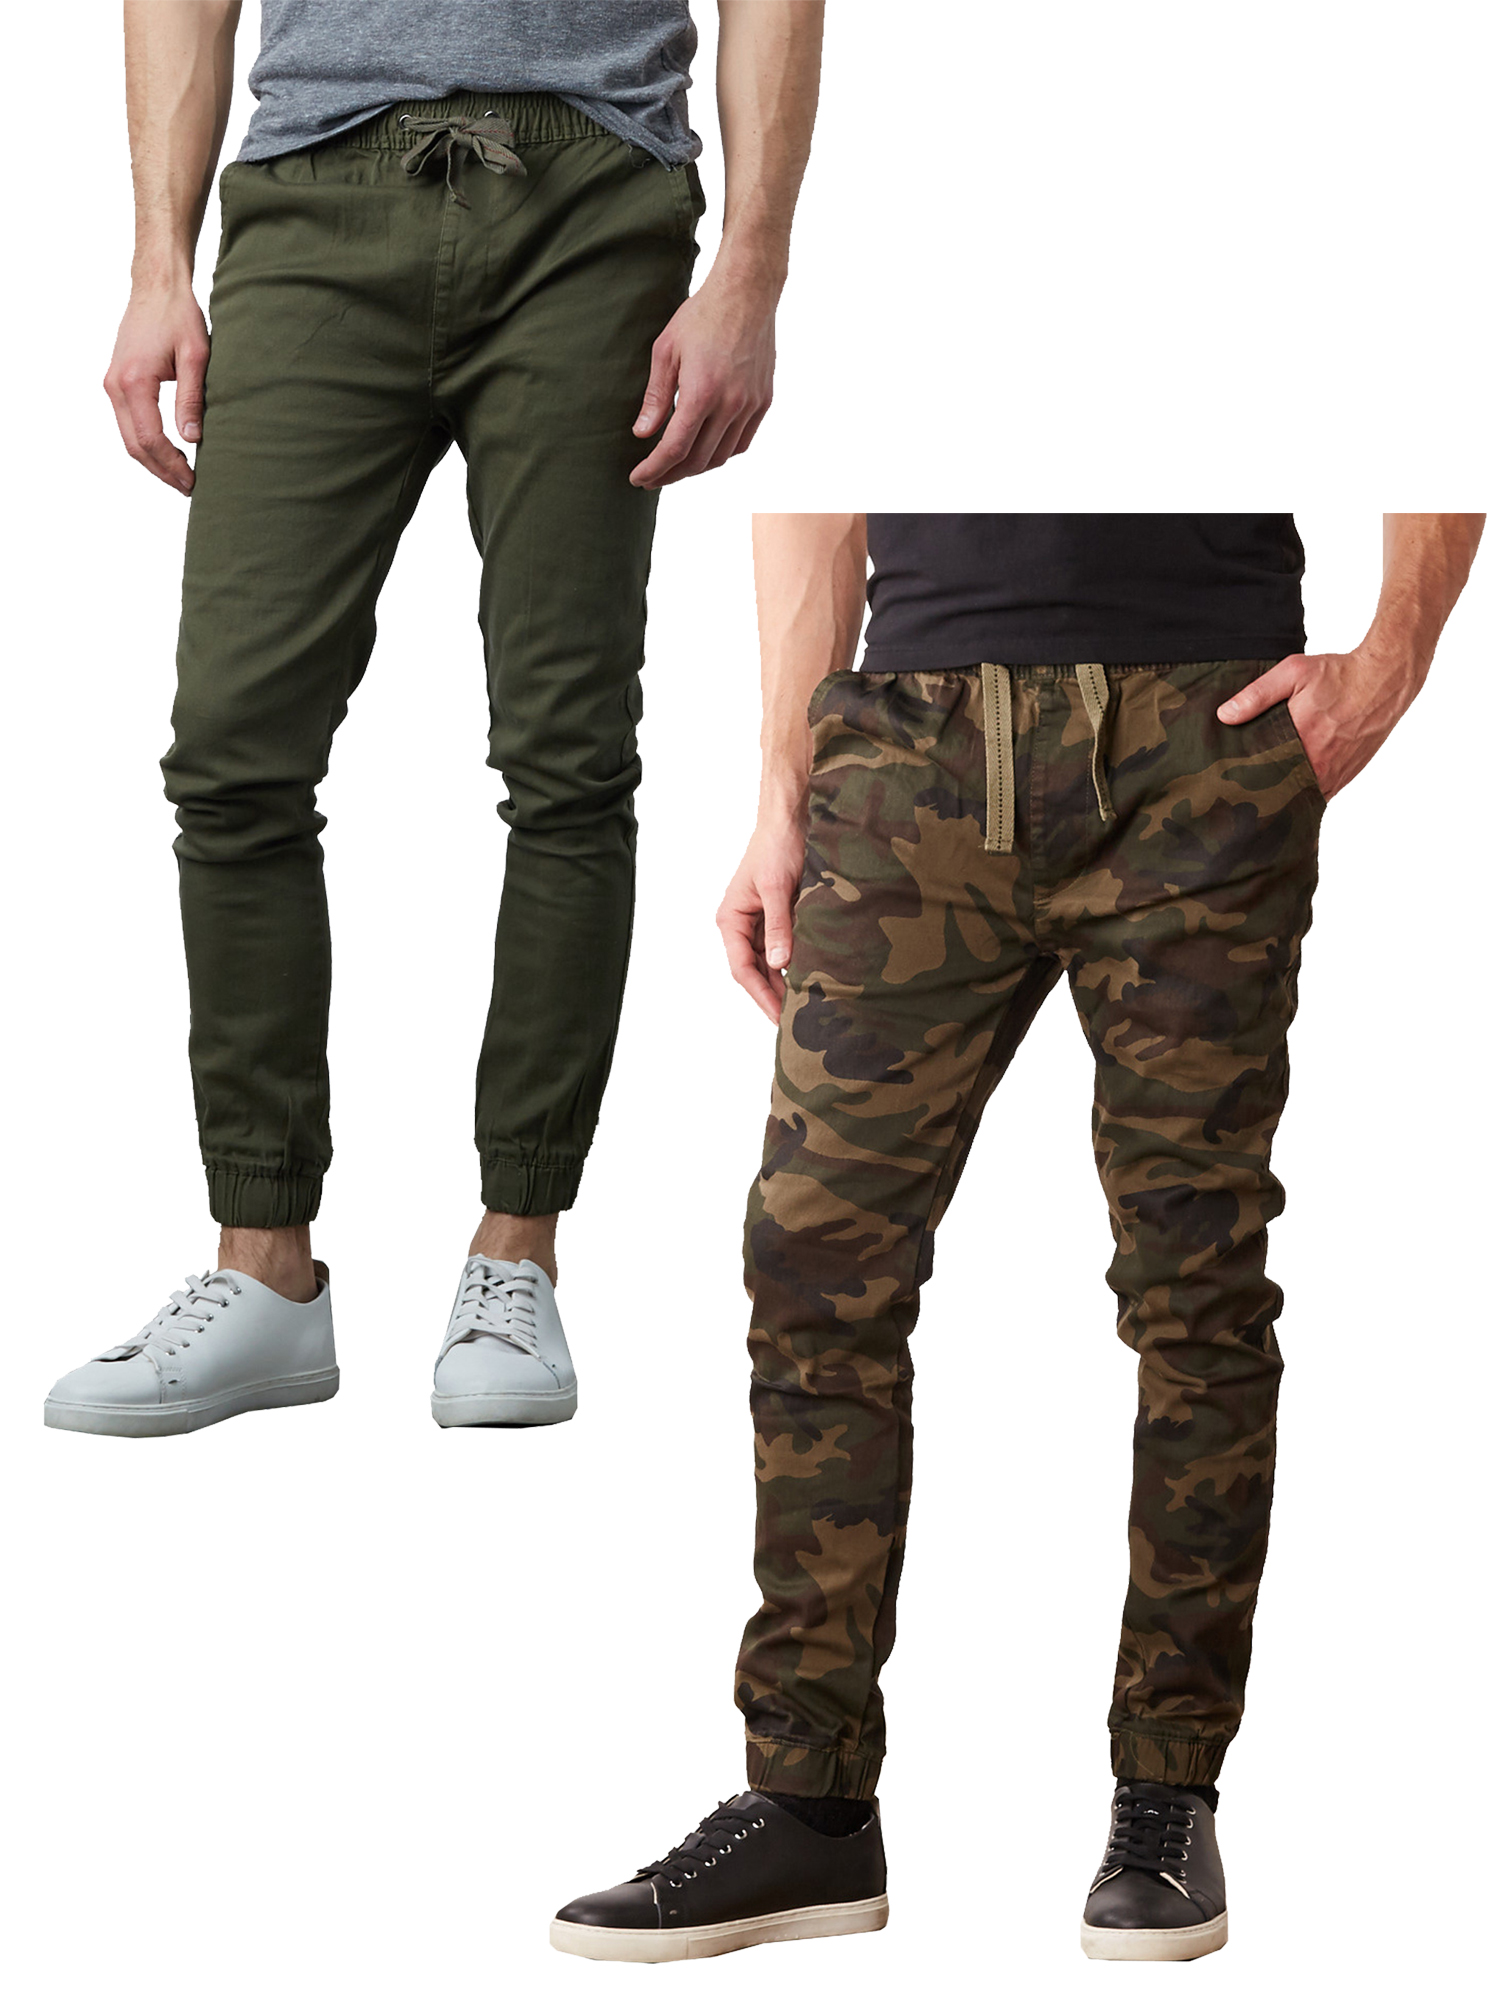 2-Pack Mens Slim-Fit Cotton Twill Jogger Pants (S-2XL) - image 1 of 13